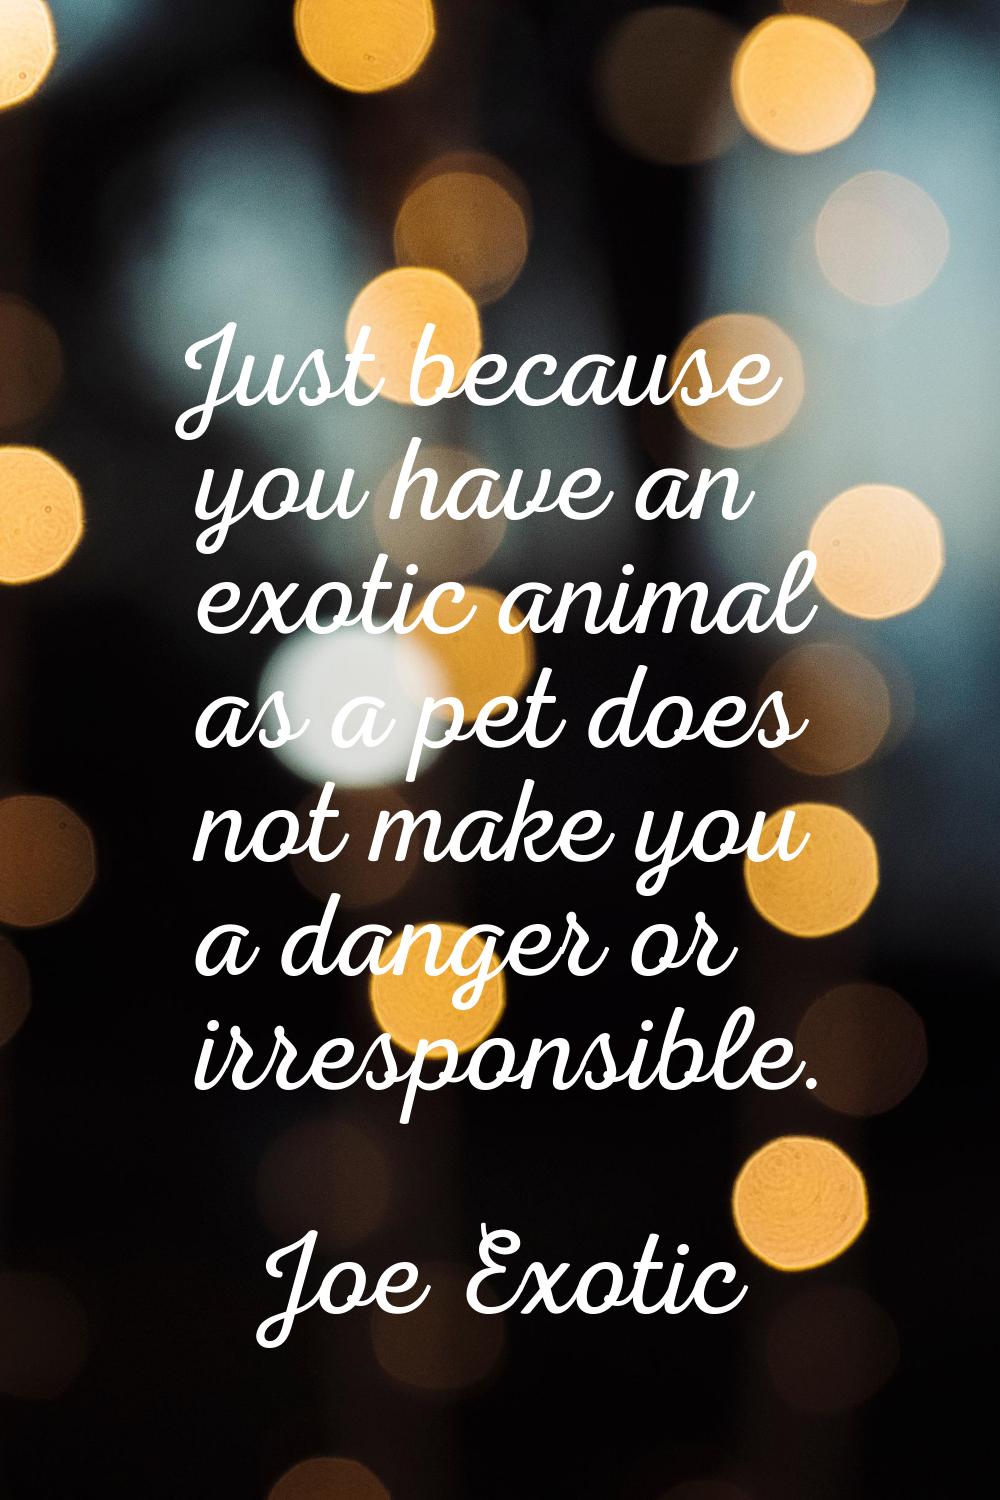 Just because you have an exotic animal as a pet does not make you a danger or irresponsible.